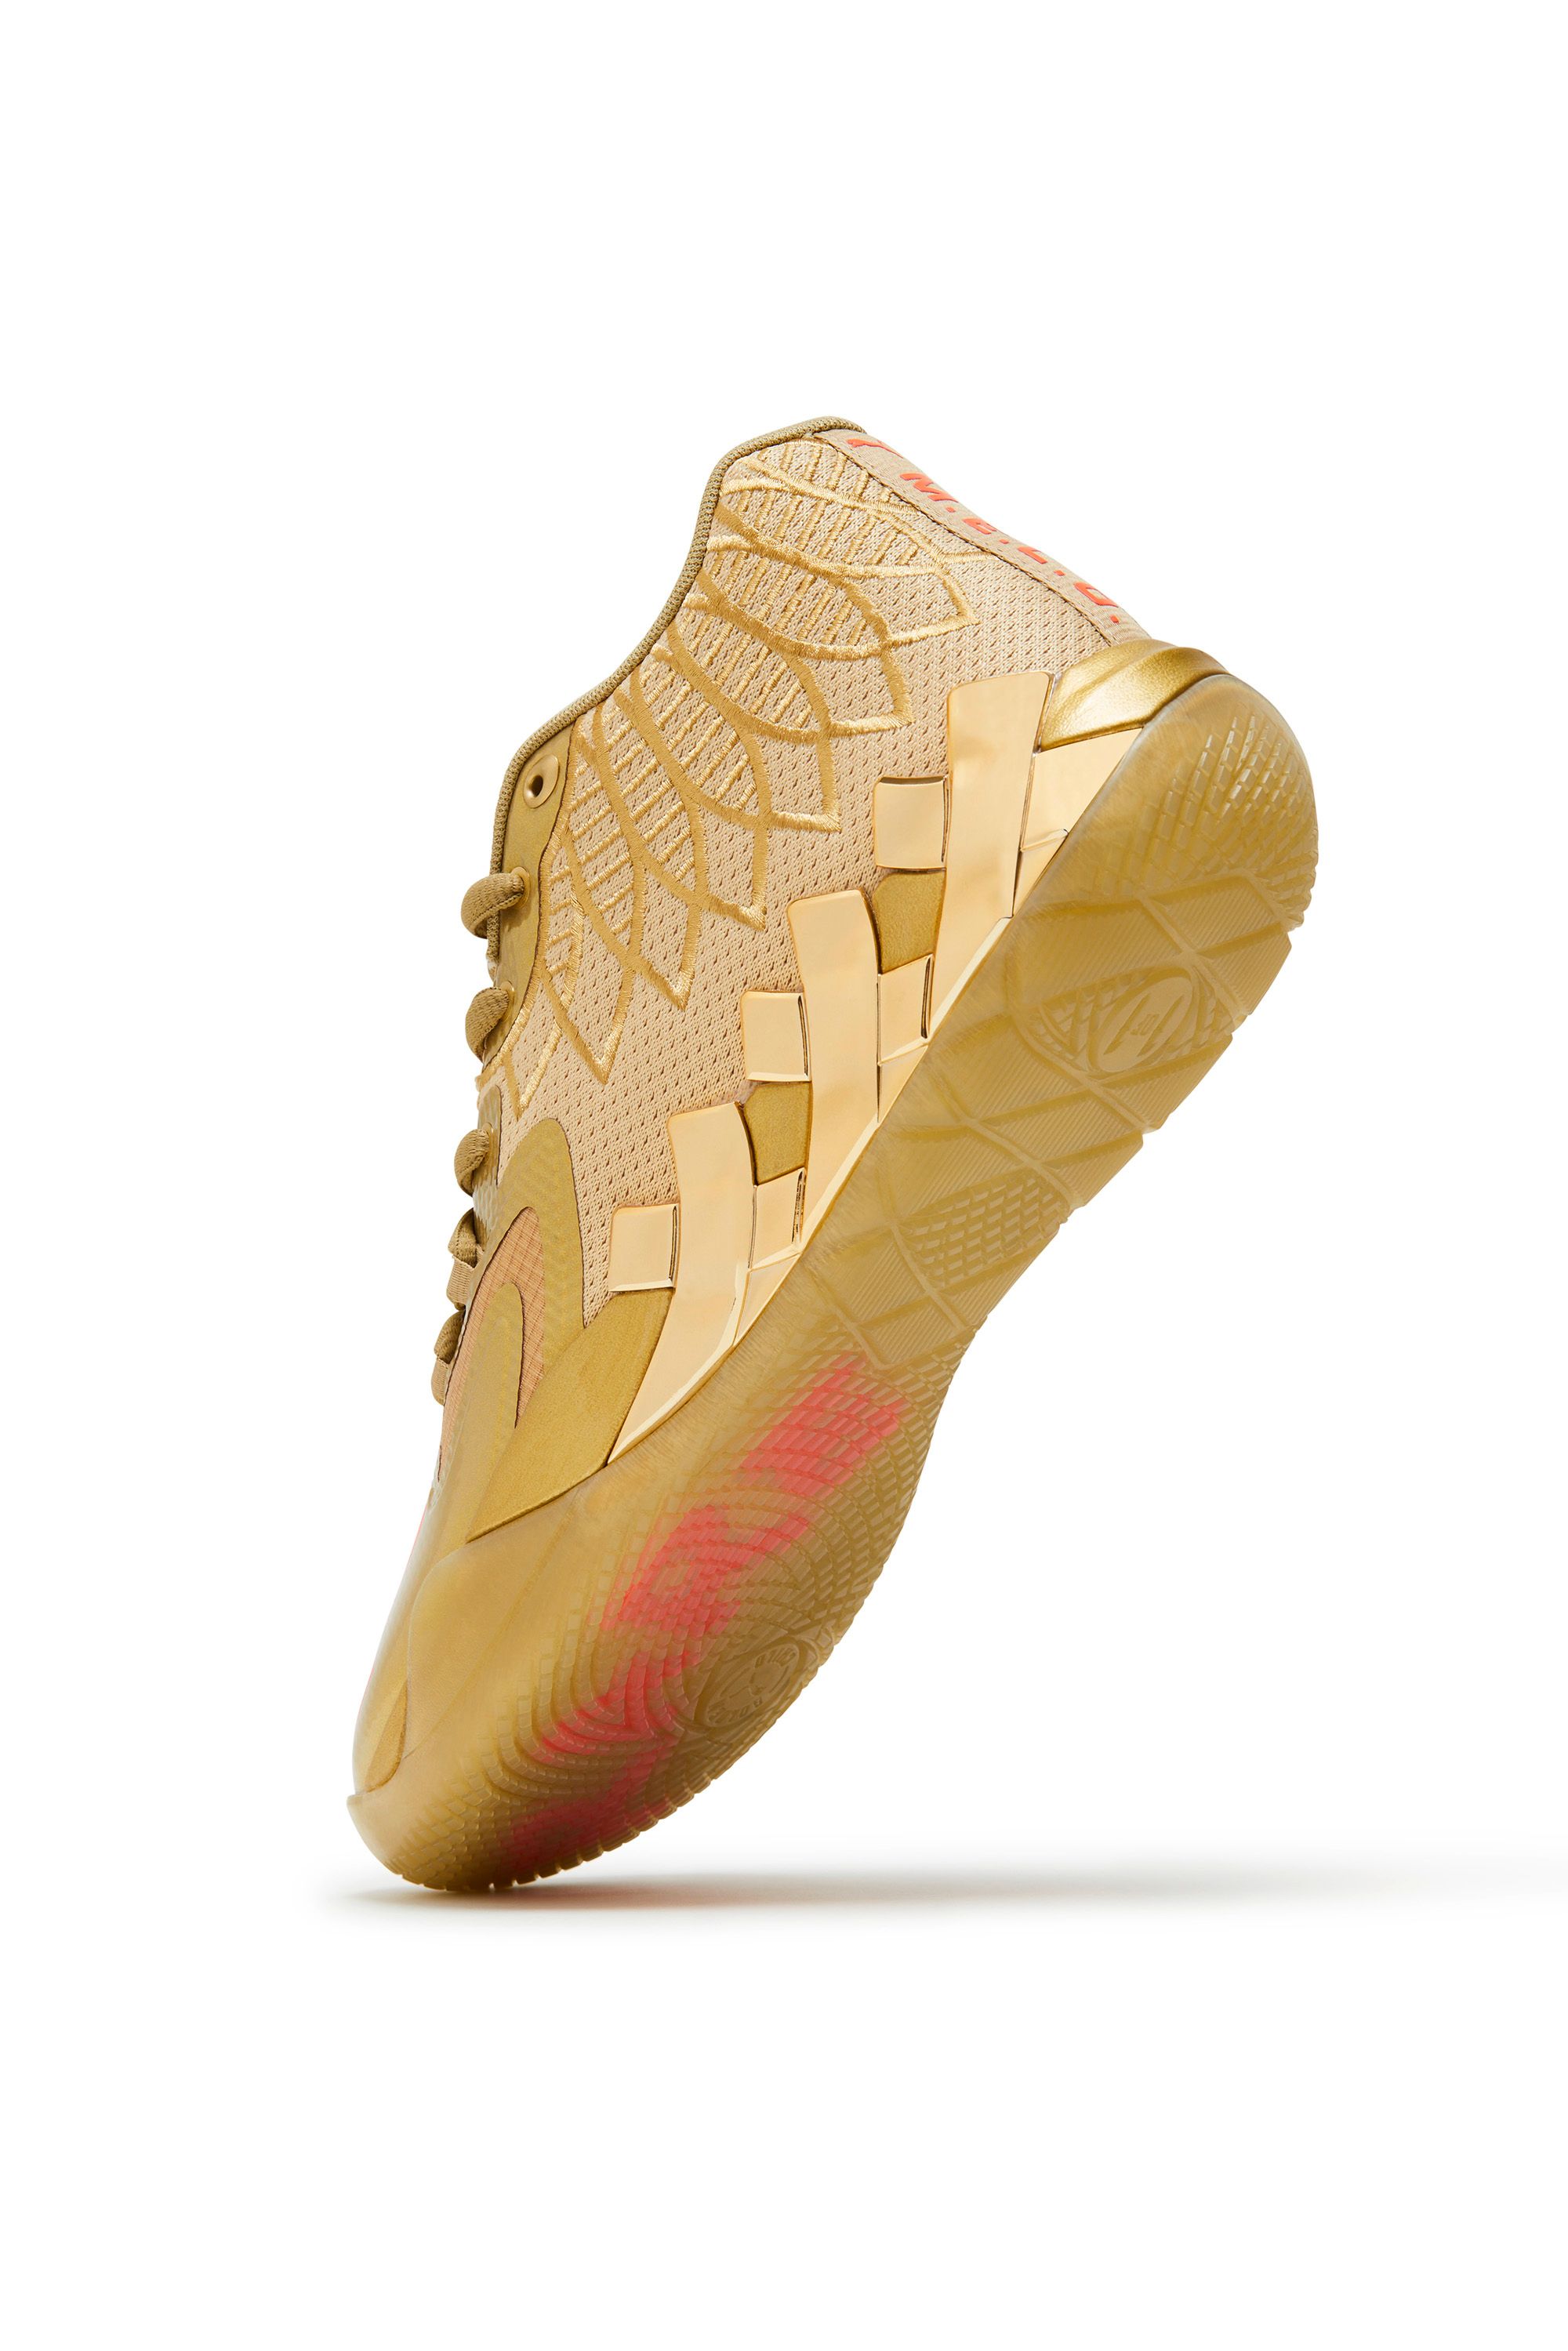 The Puma MB.01 “Golden Child” Releases November 24 ...